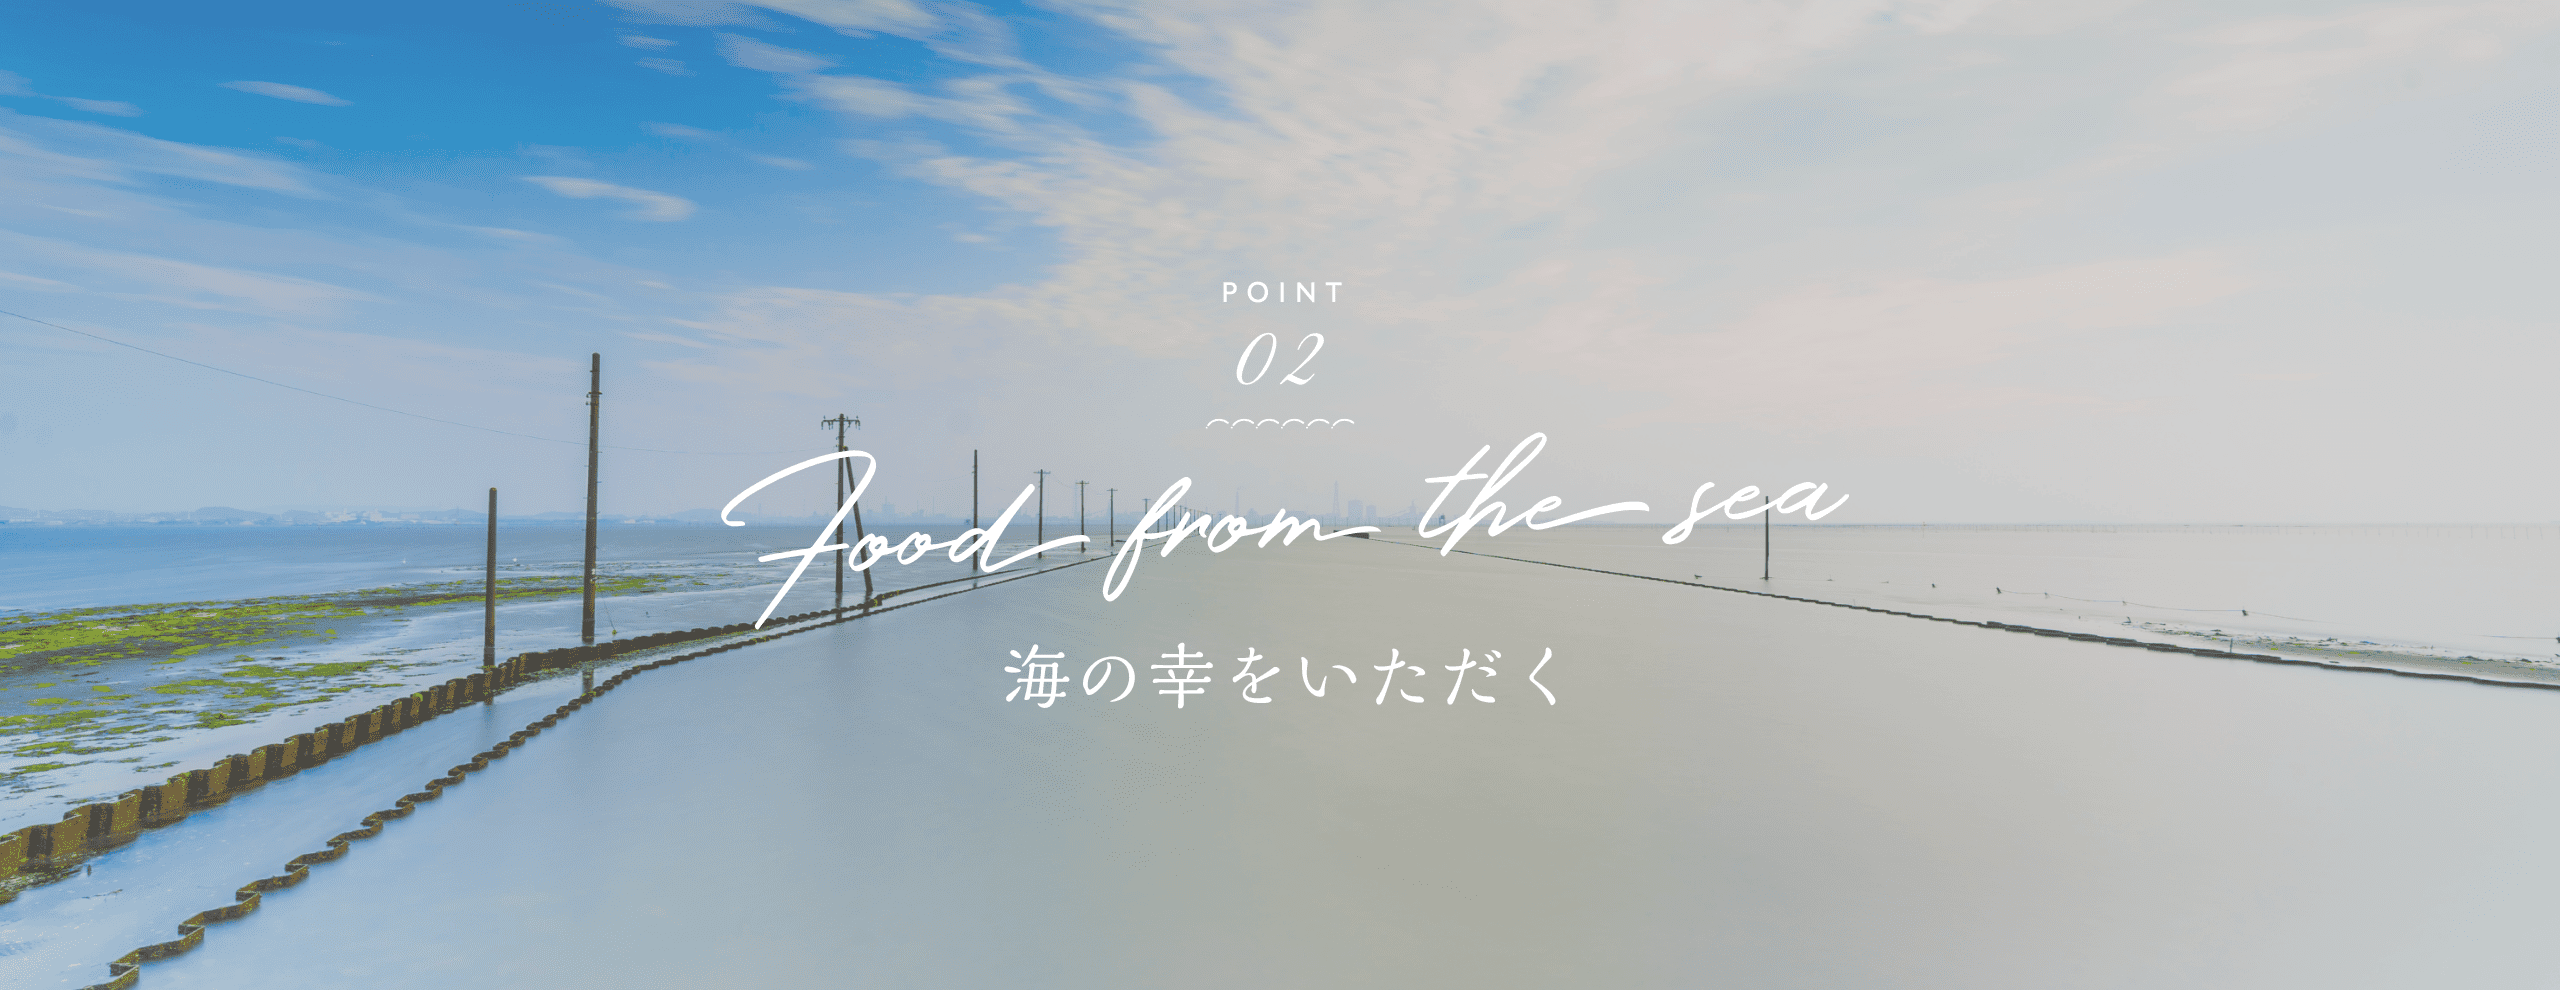 POINT 02 Food from the sea 海の幸をいただく